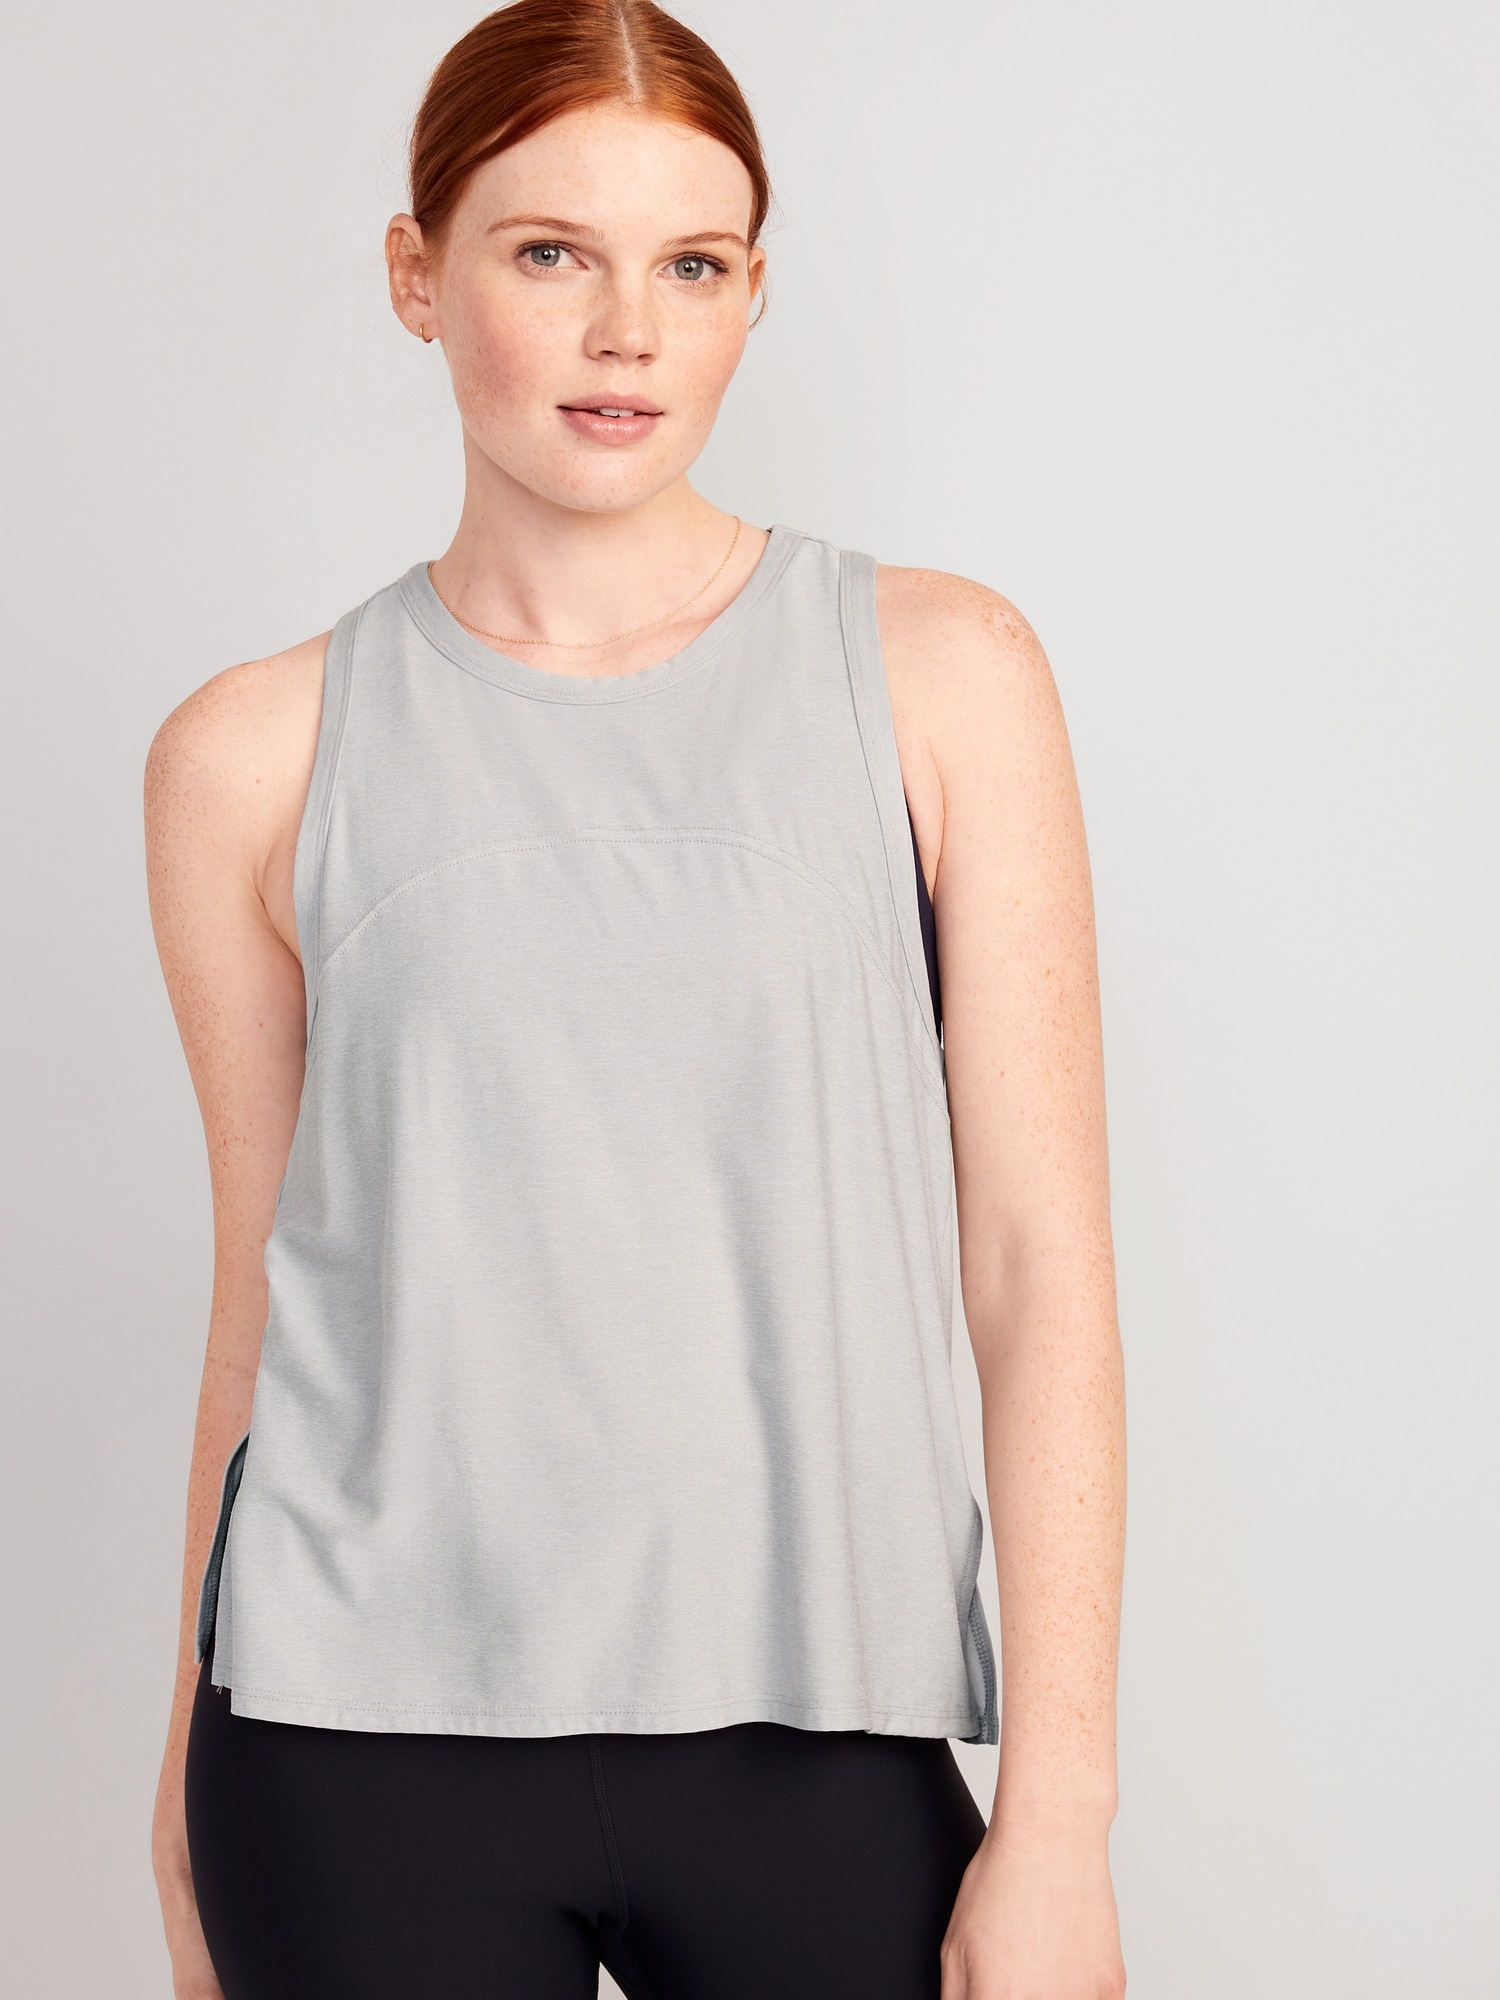 Women\'s Loose Fit Tank Tops | Old Navy | Rundhalsshirts